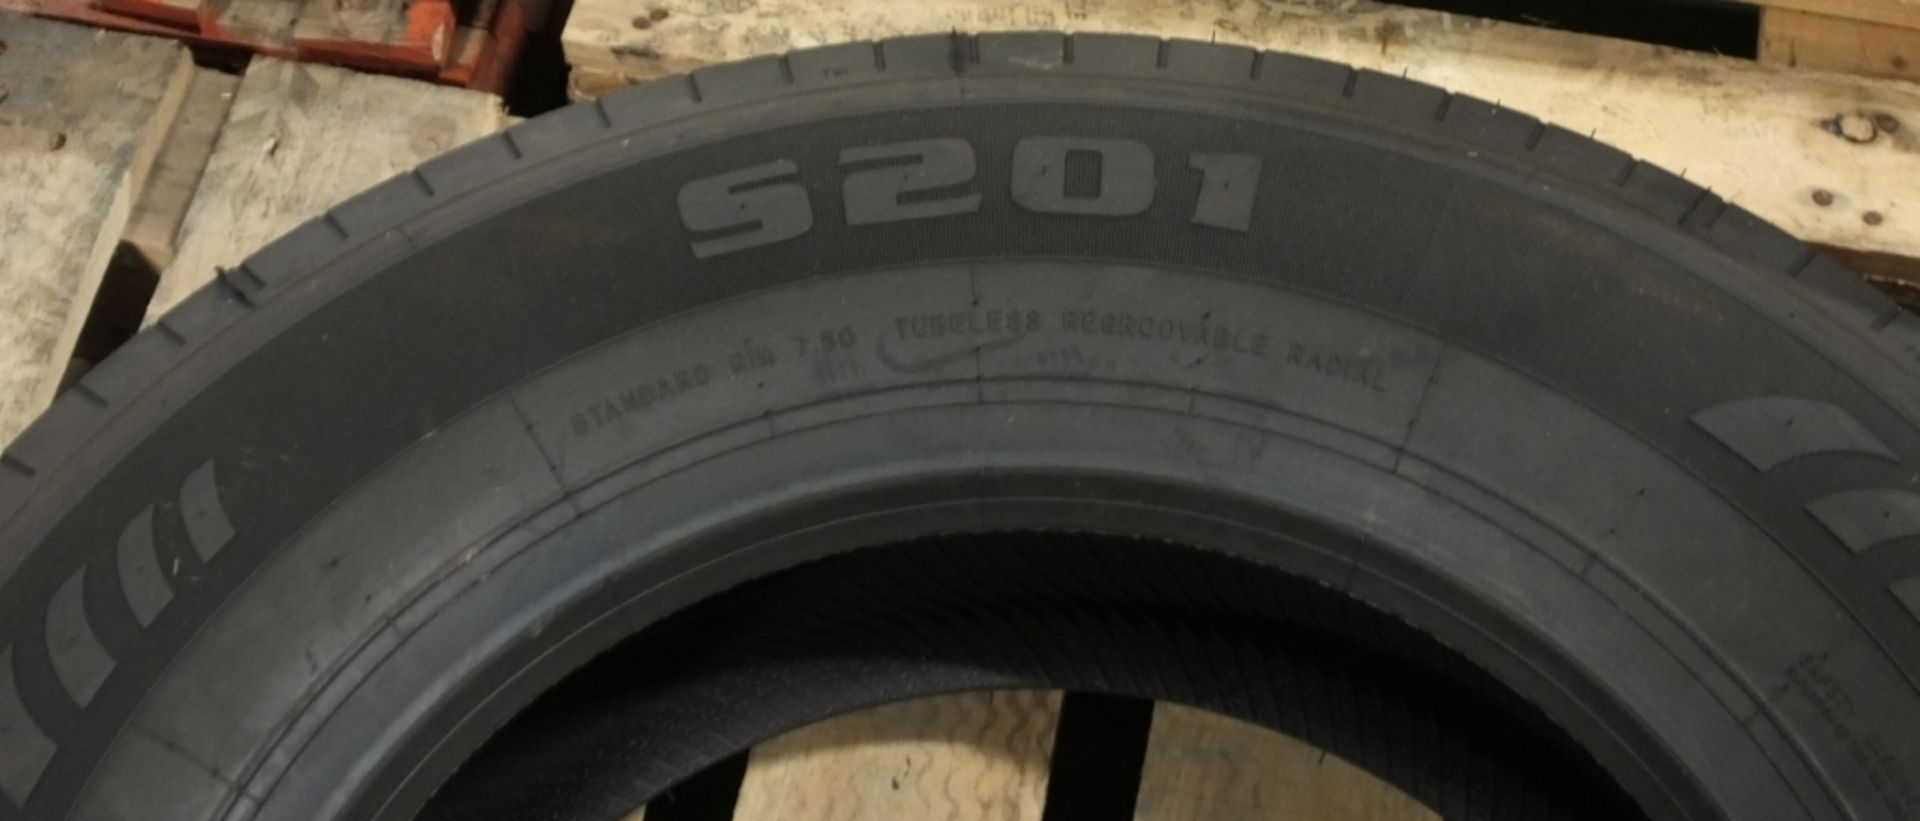 Alpus Commercial Tire - 265 / 70R 19.5 - S201 - Image 3 of 5